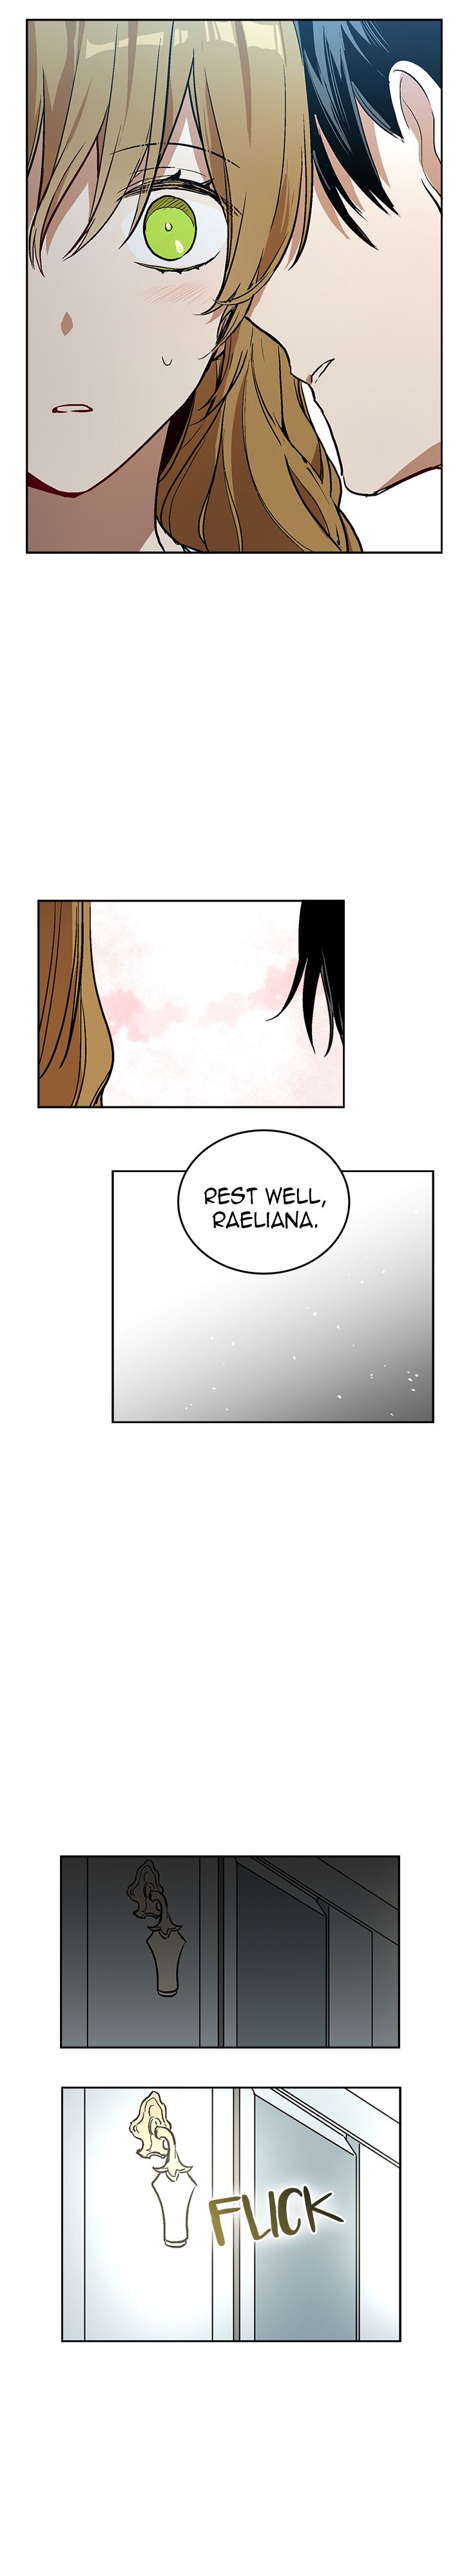 The Reason Why Raeliana Ended up at the Duke's Mansion Ch.42